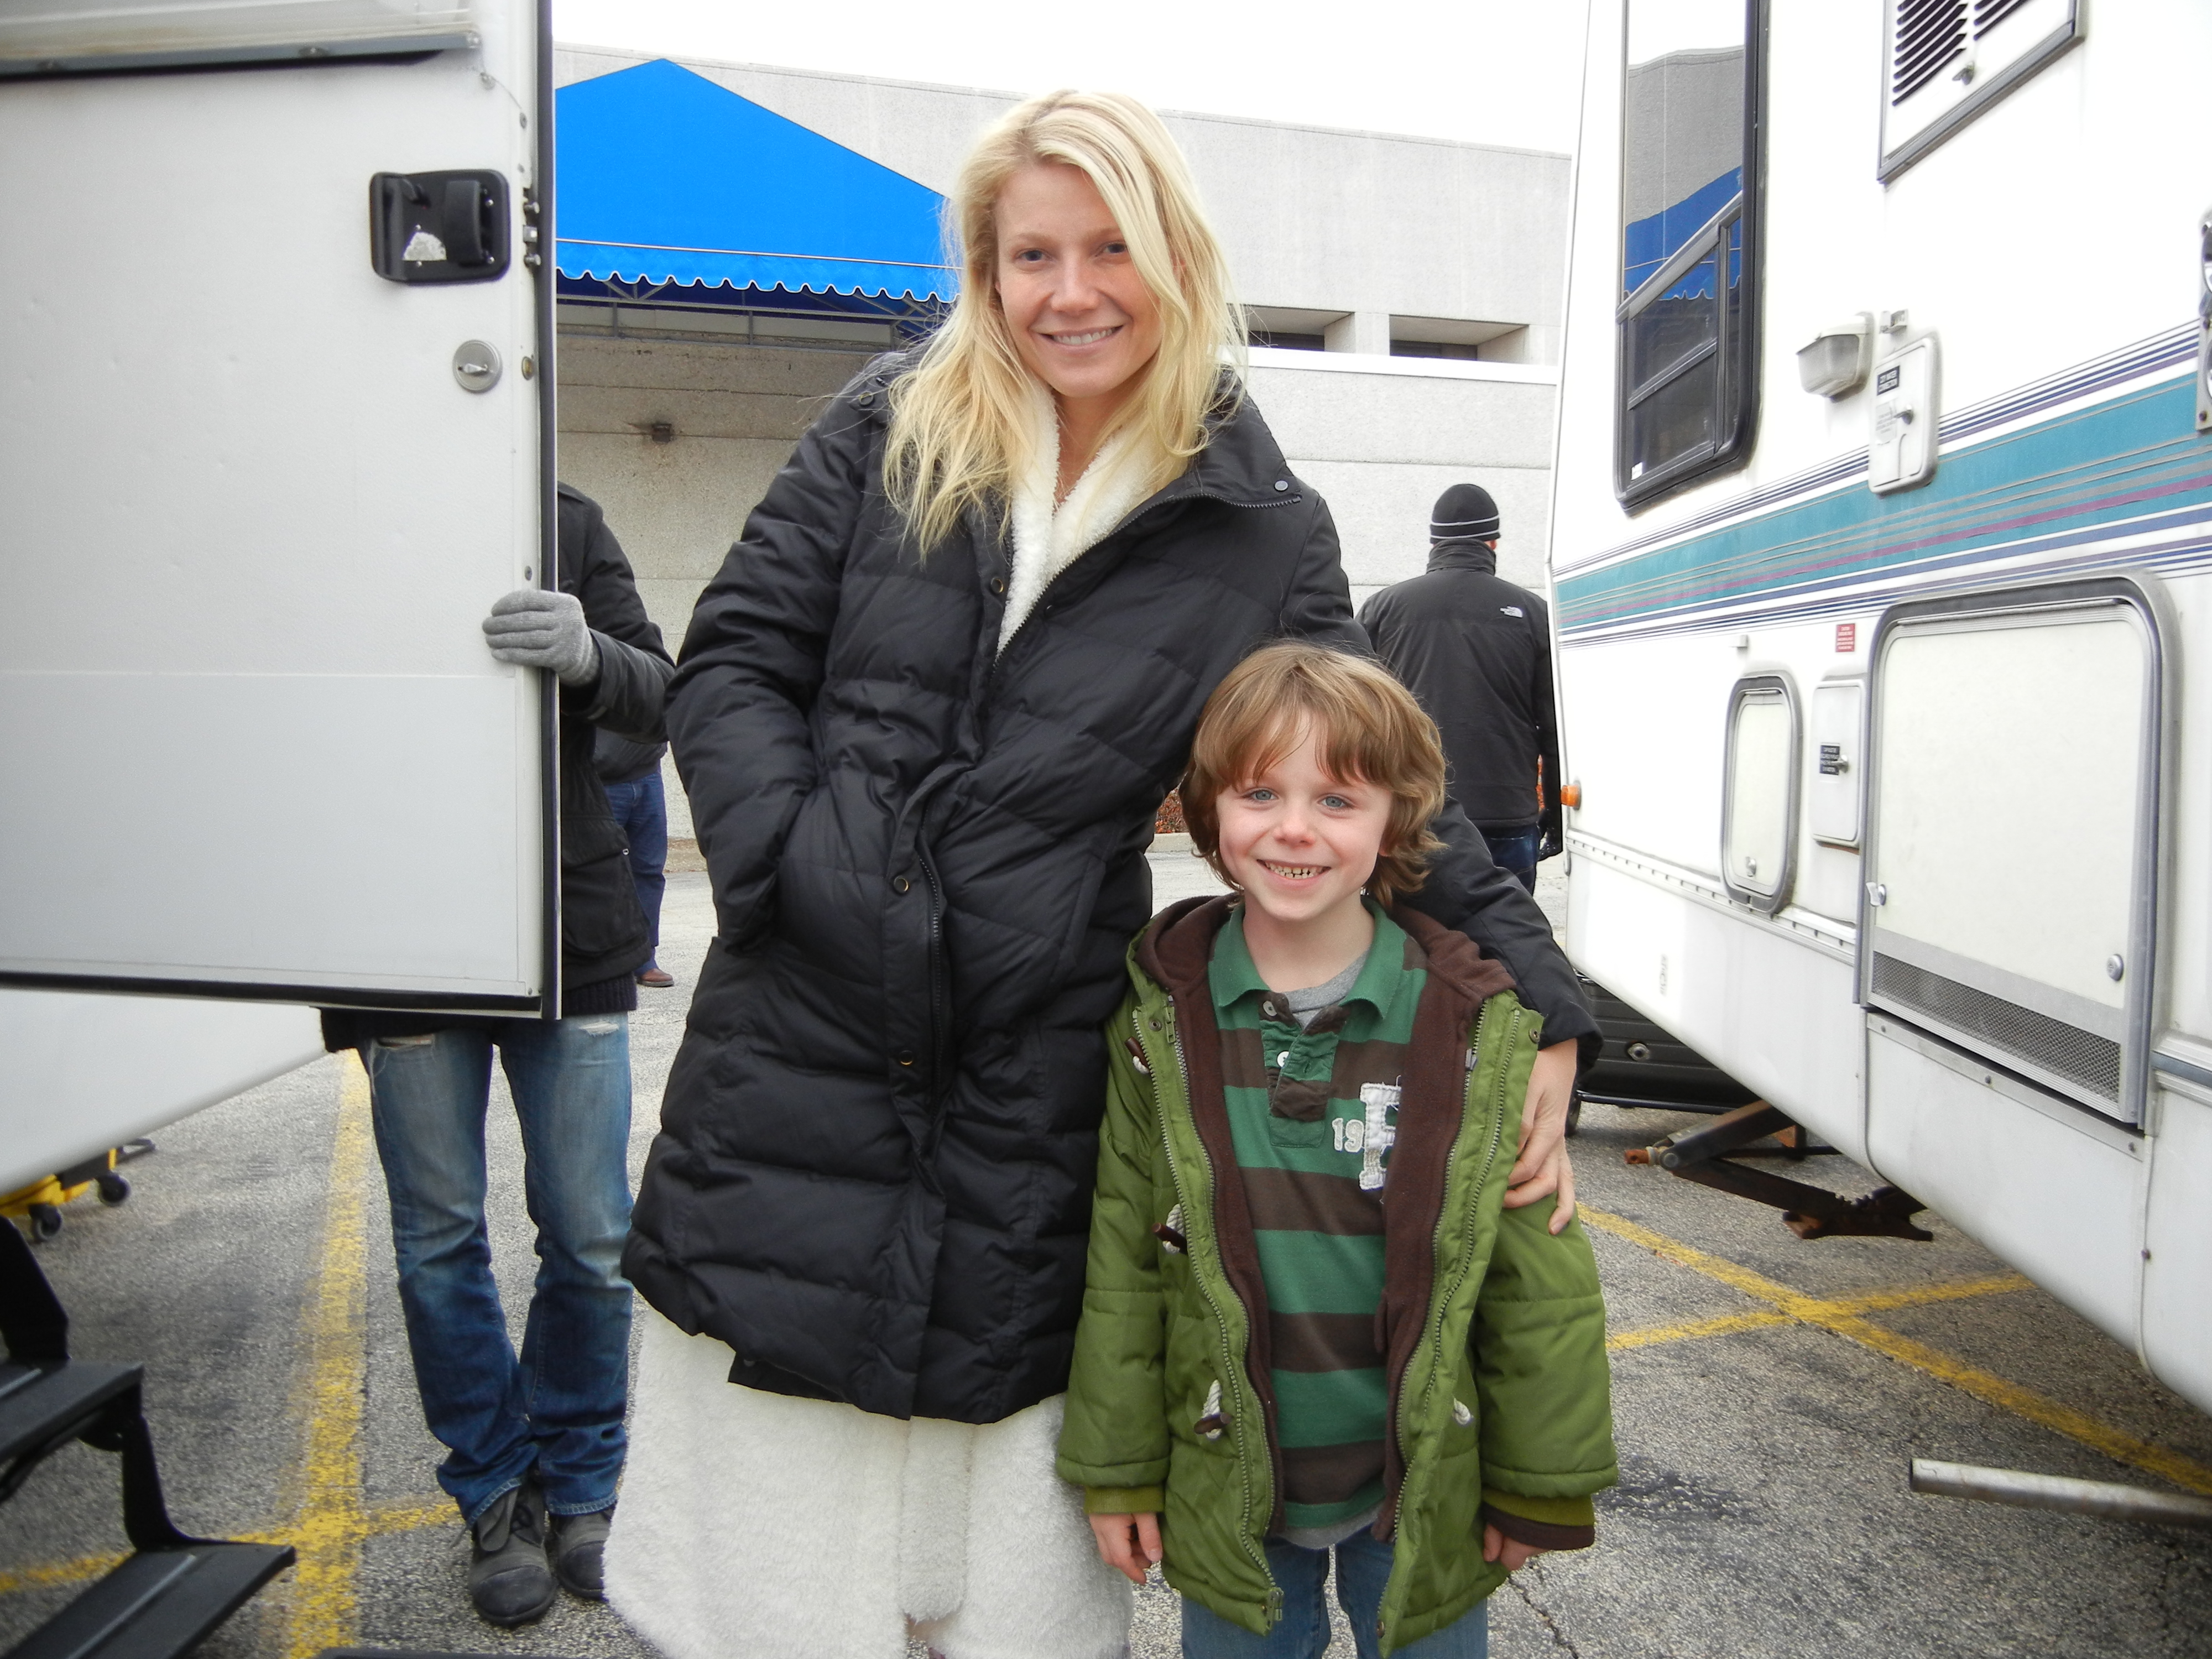 Griffin Kane and Gwyneth Paltrow on the set of Contagion, 2010.